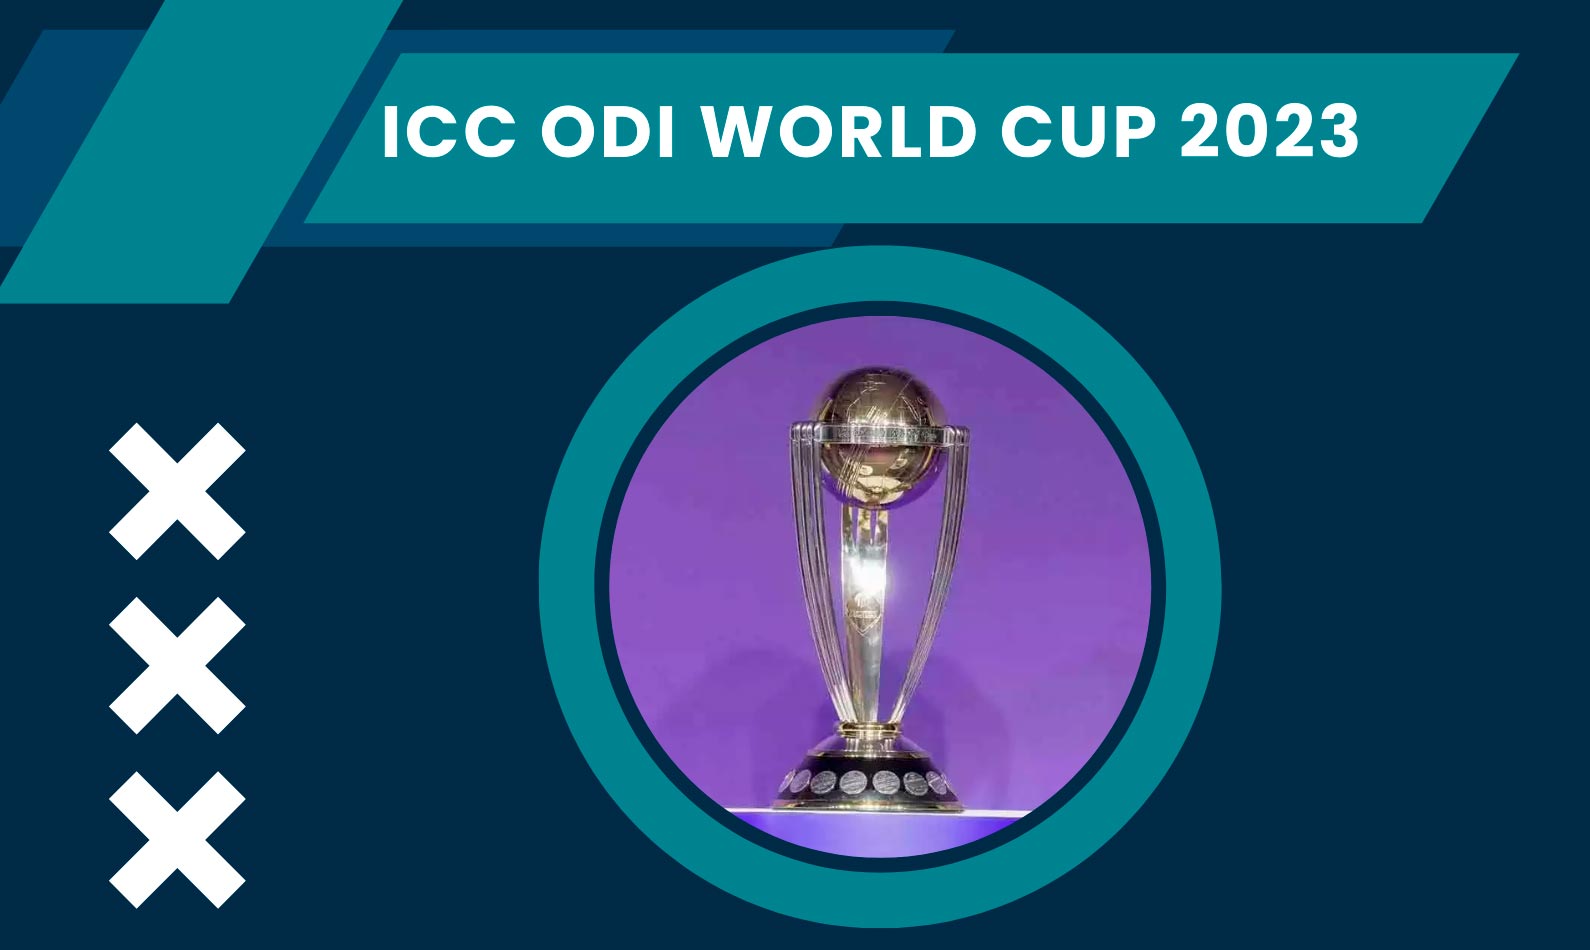 ICC ODI World Cup 2023: India vs Pakistan Match is Going to Held at Narendra Modi Stadium on 15th October